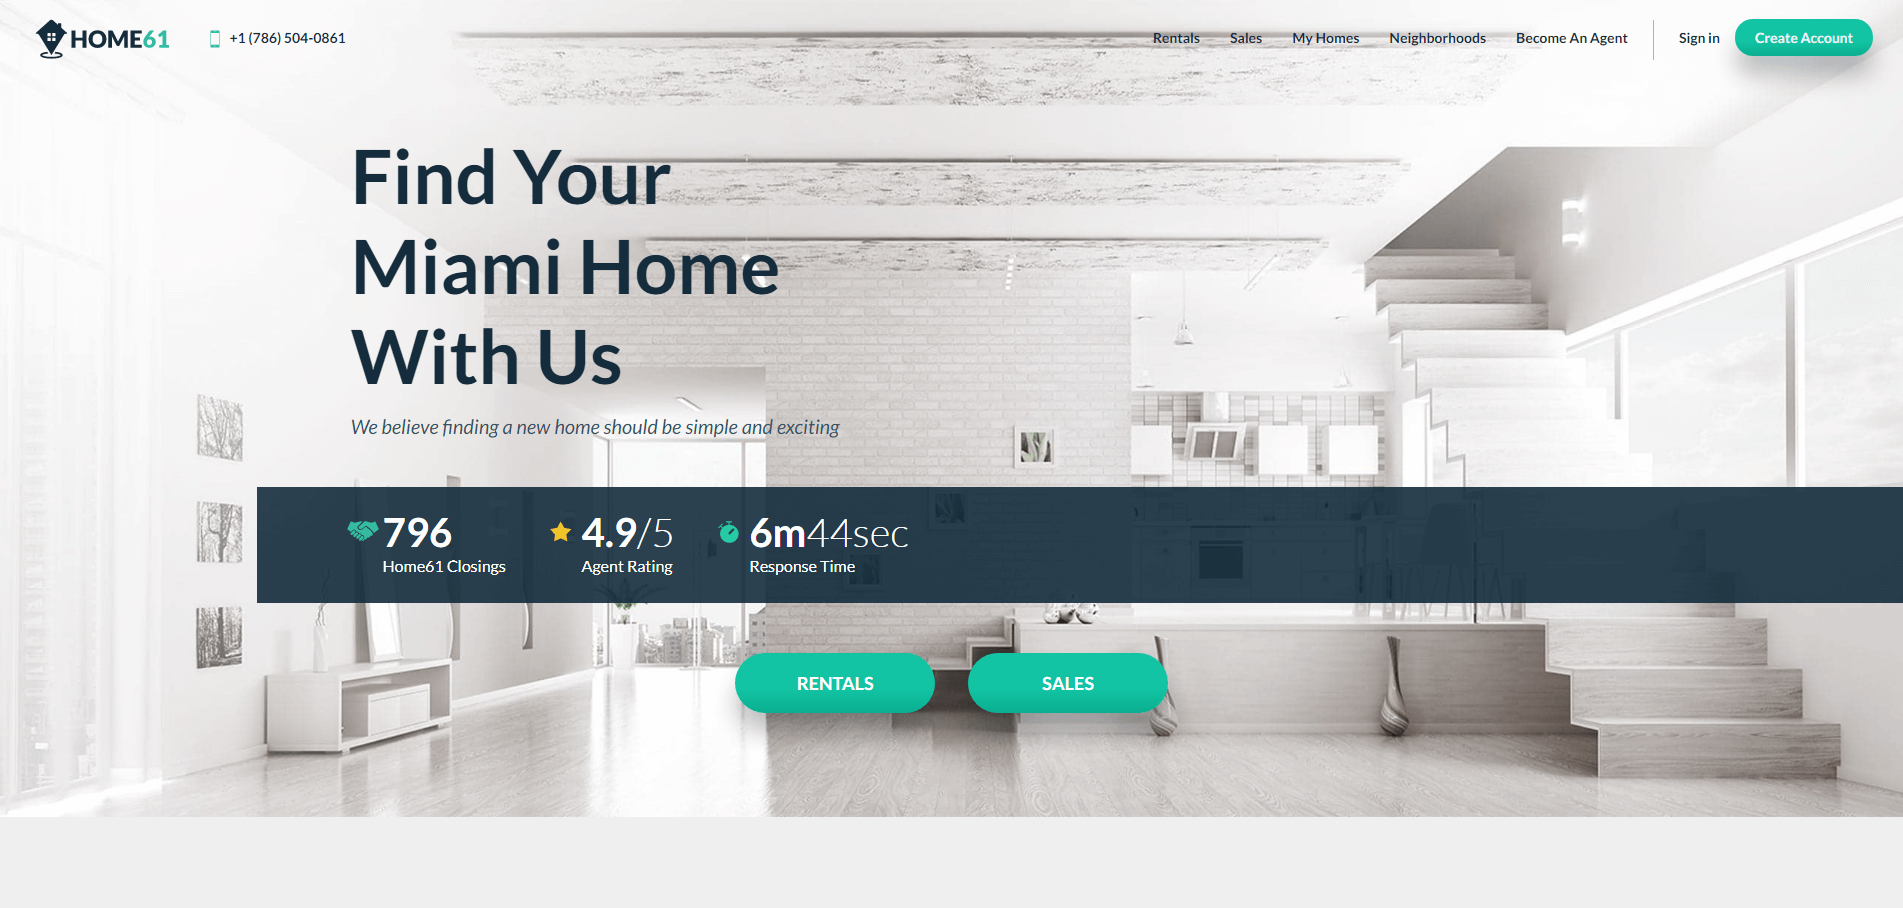  Unbelievable!  We made a list of the 101 best real estate websites.  We reviewed and ranked each site, 1-101.  Here's home61.com.  Did your site make the list? 